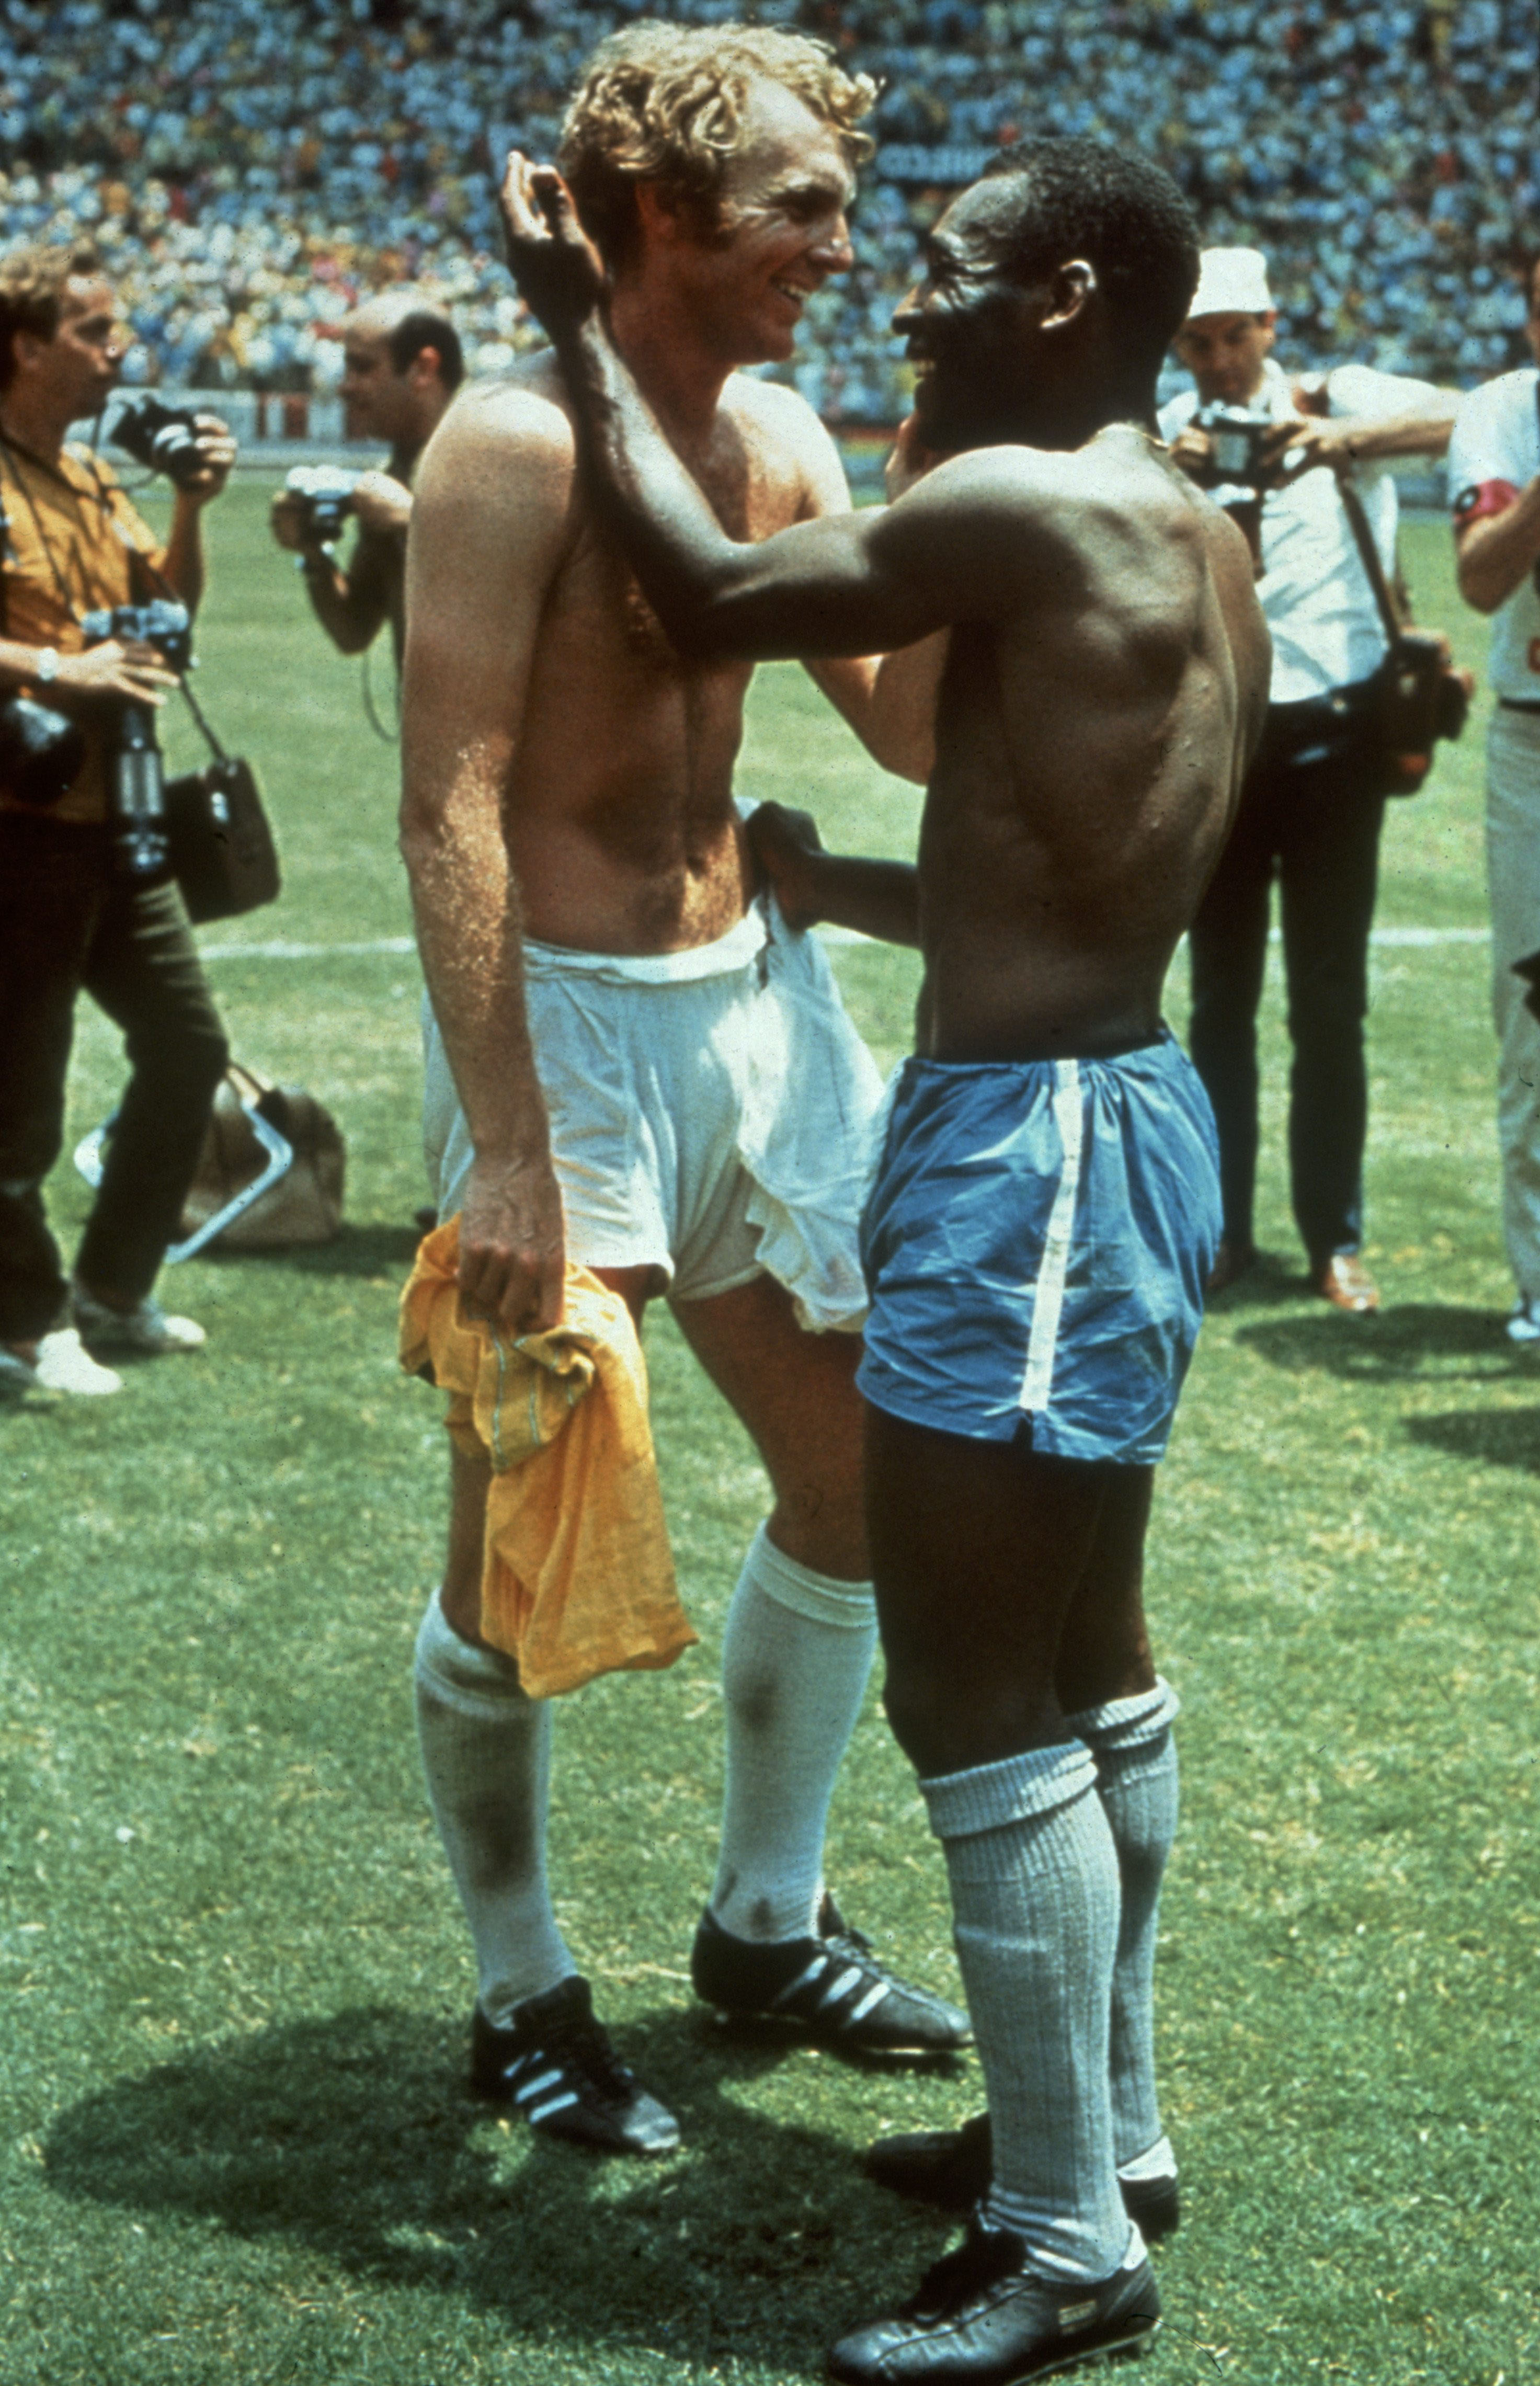 Brazil legend Pele, seen in this iconic snap with England legend Bobby Moore, was the greatest attraction  when he played at Wembley